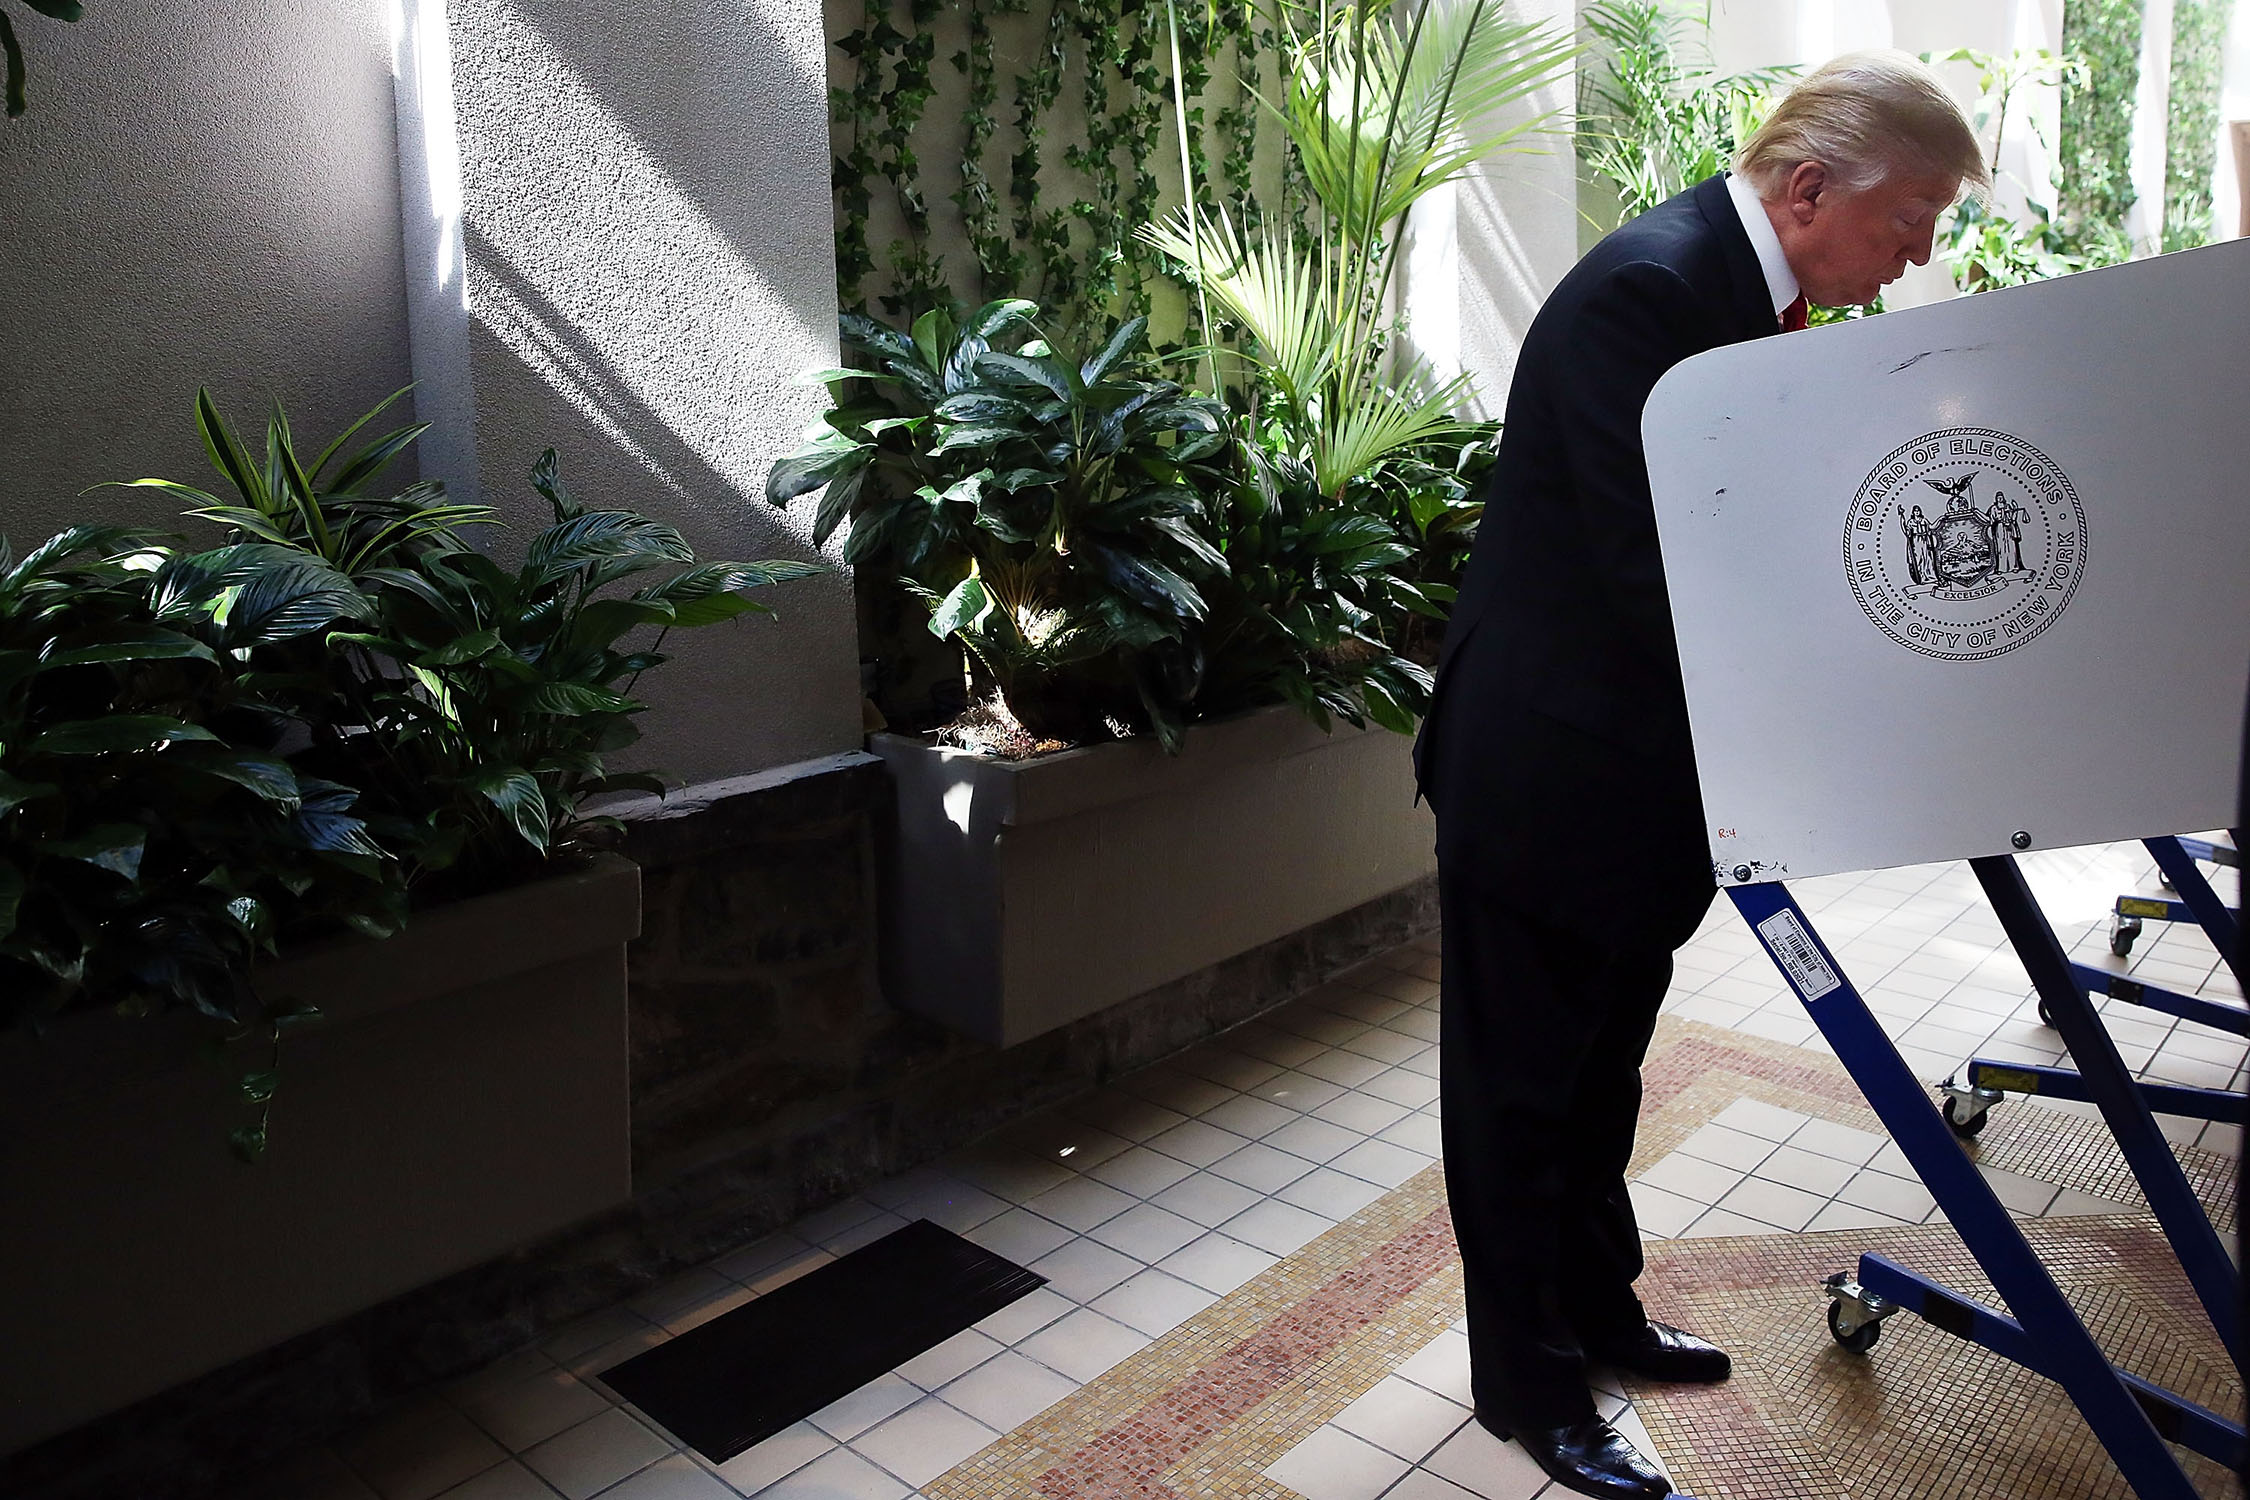 Republican Presidential candidate Donald Trump votes at his local polling station in New York's primary on April 19, 2016.